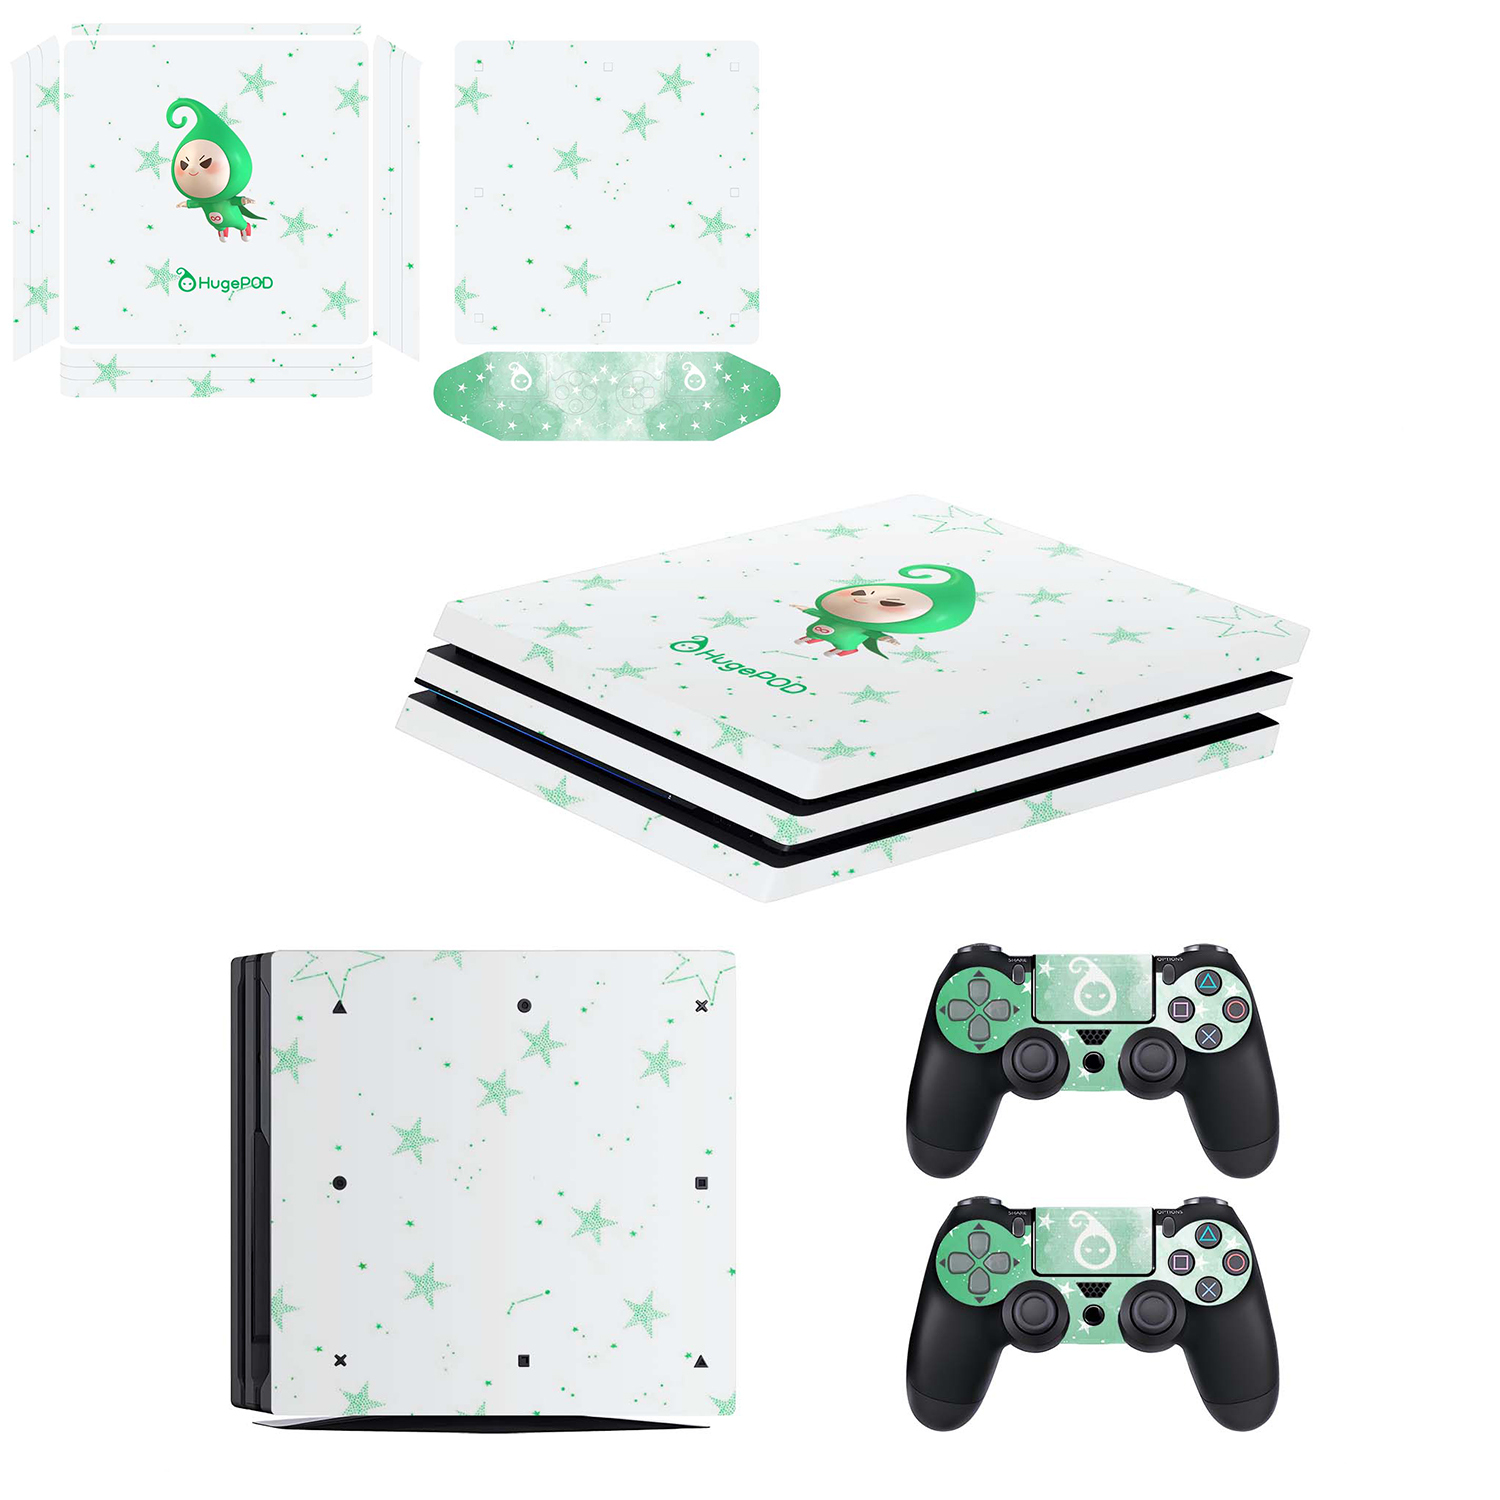 Stickers Compatible With PS4 Slim | HugePOD-1